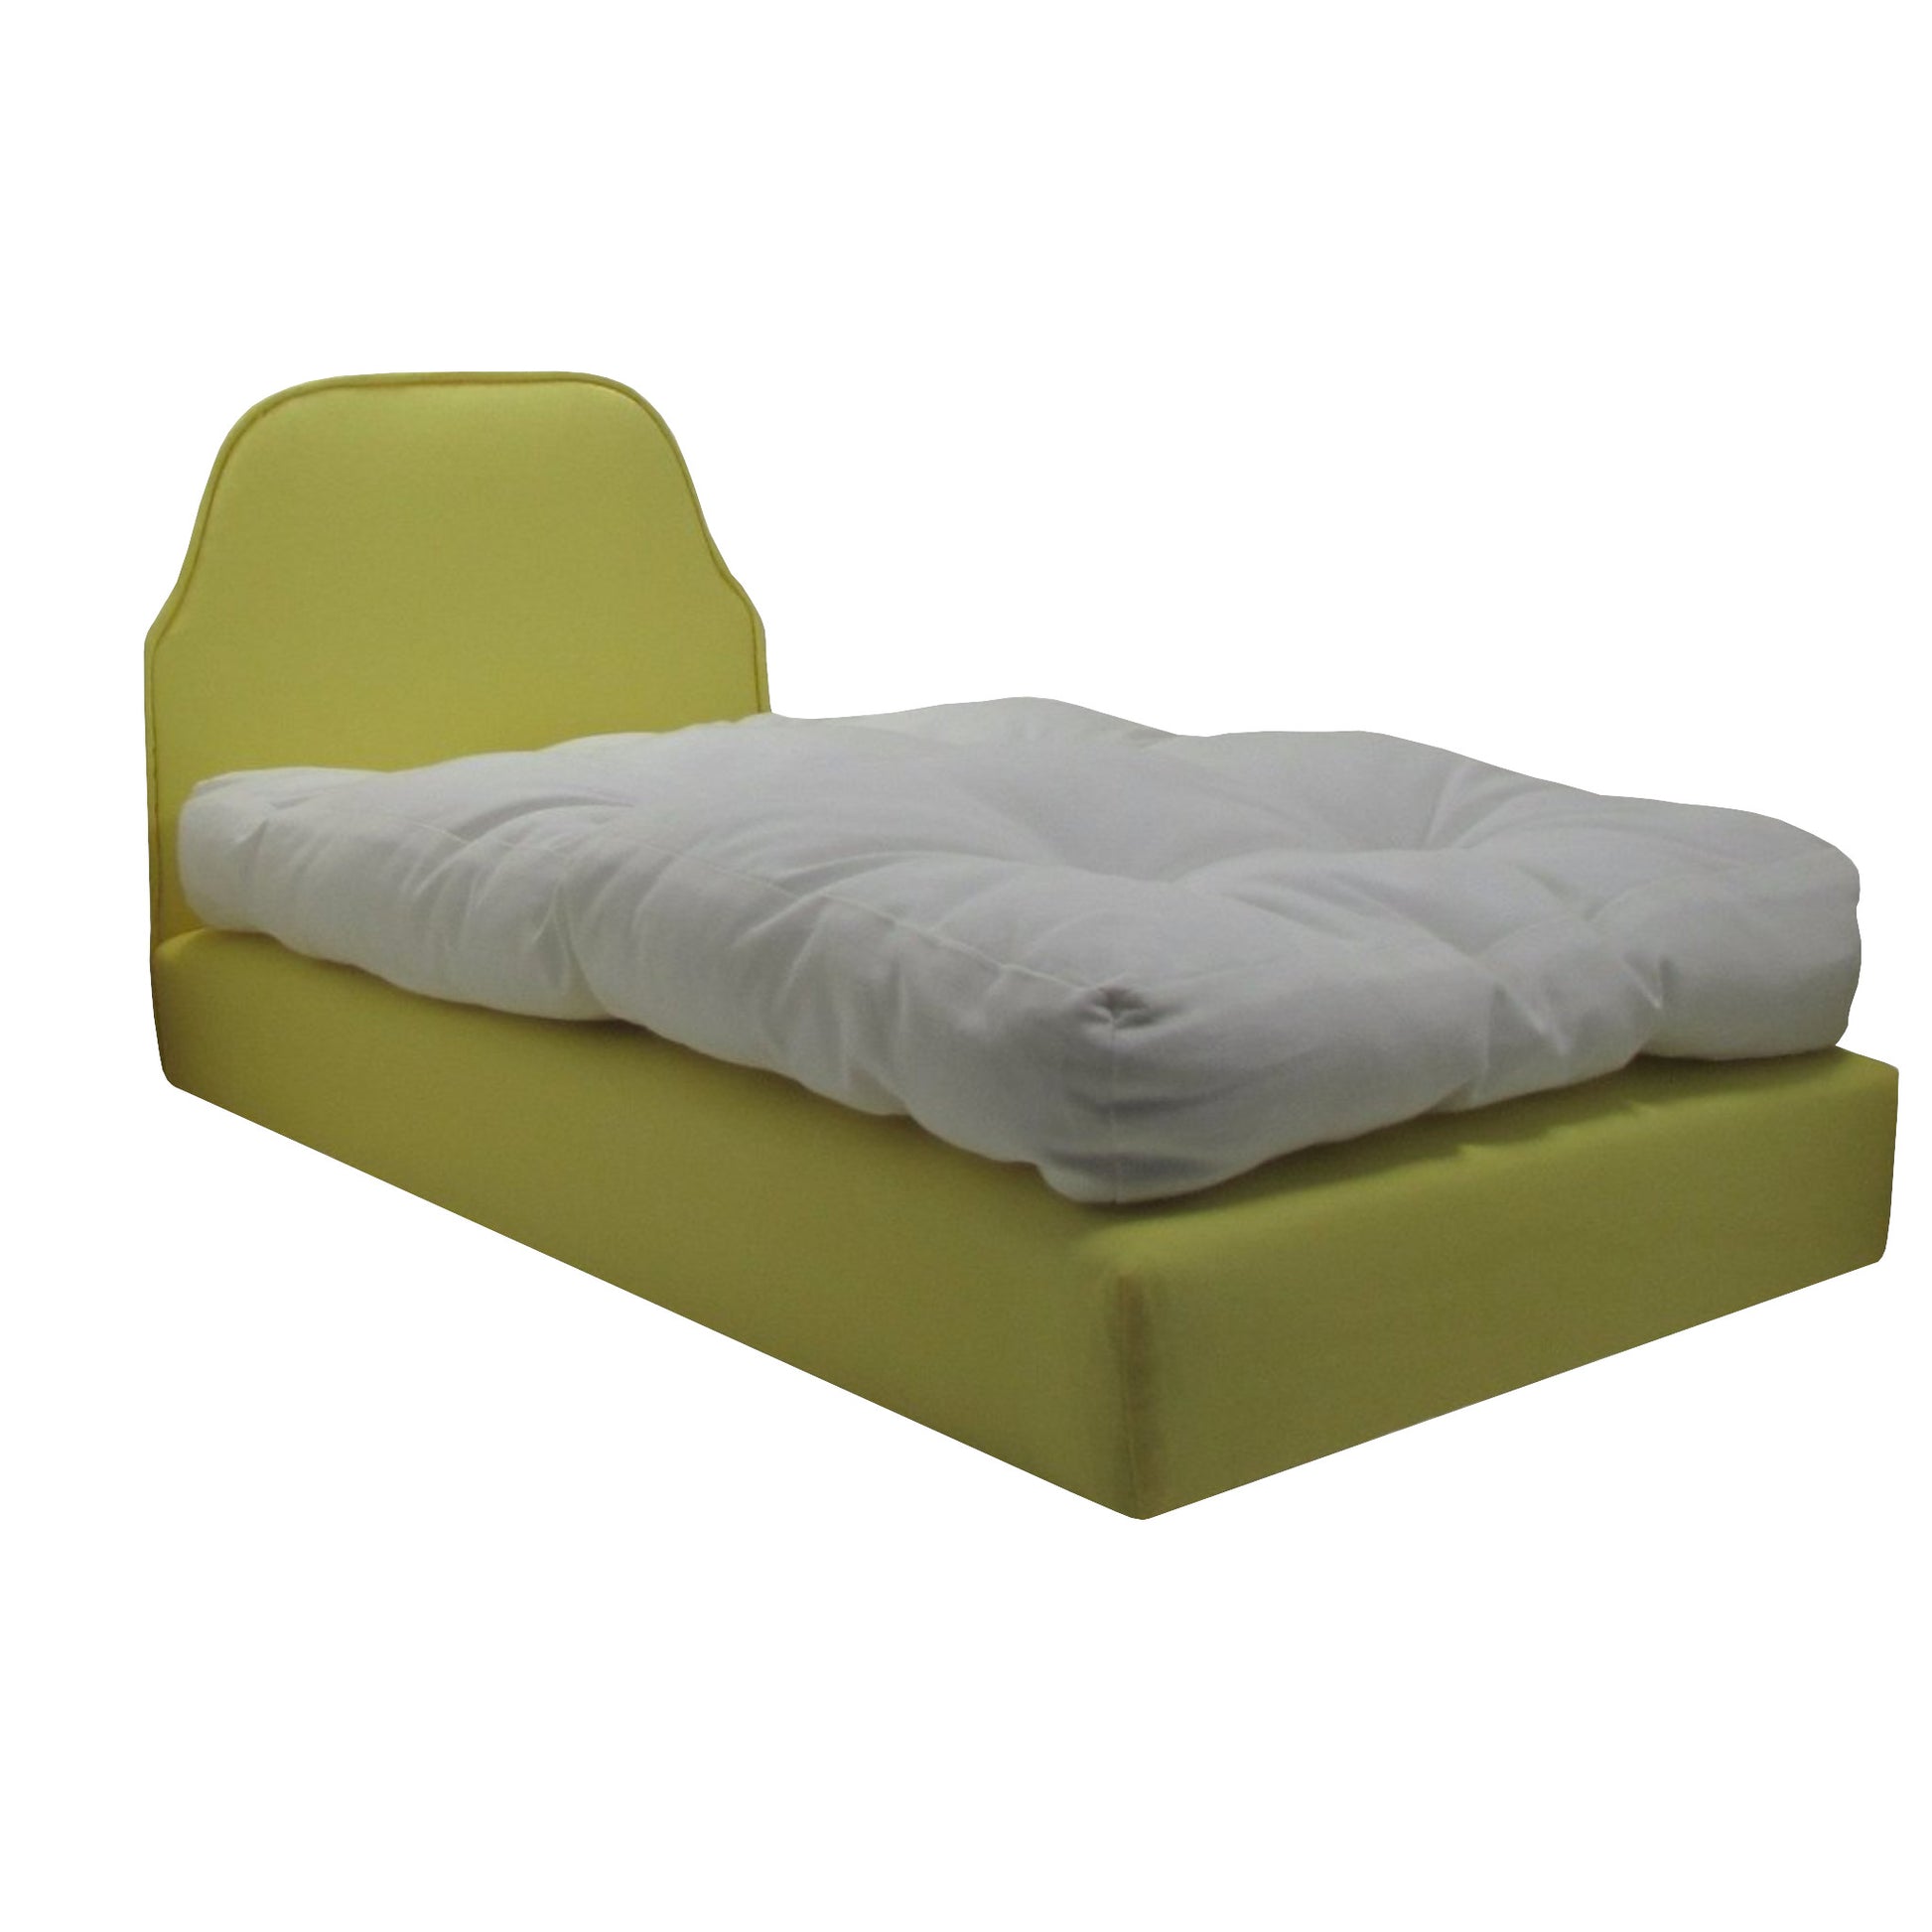 Upholstered Light Yellow Doll Bed for 18-inch dolls